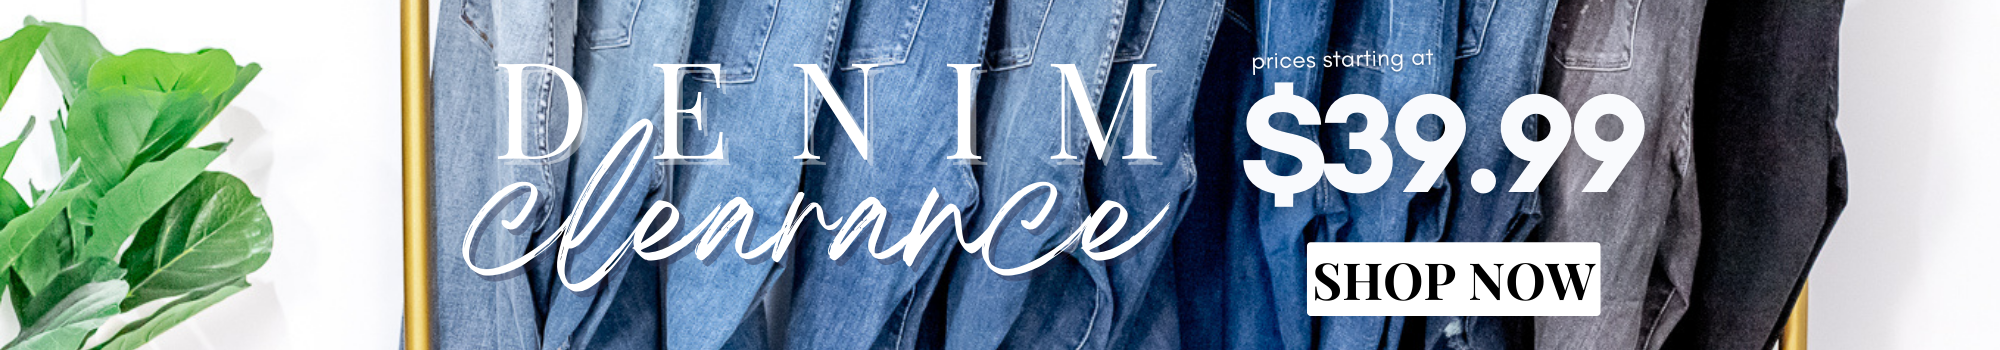 Denim Clearance Sale. Prices starting at $39.99